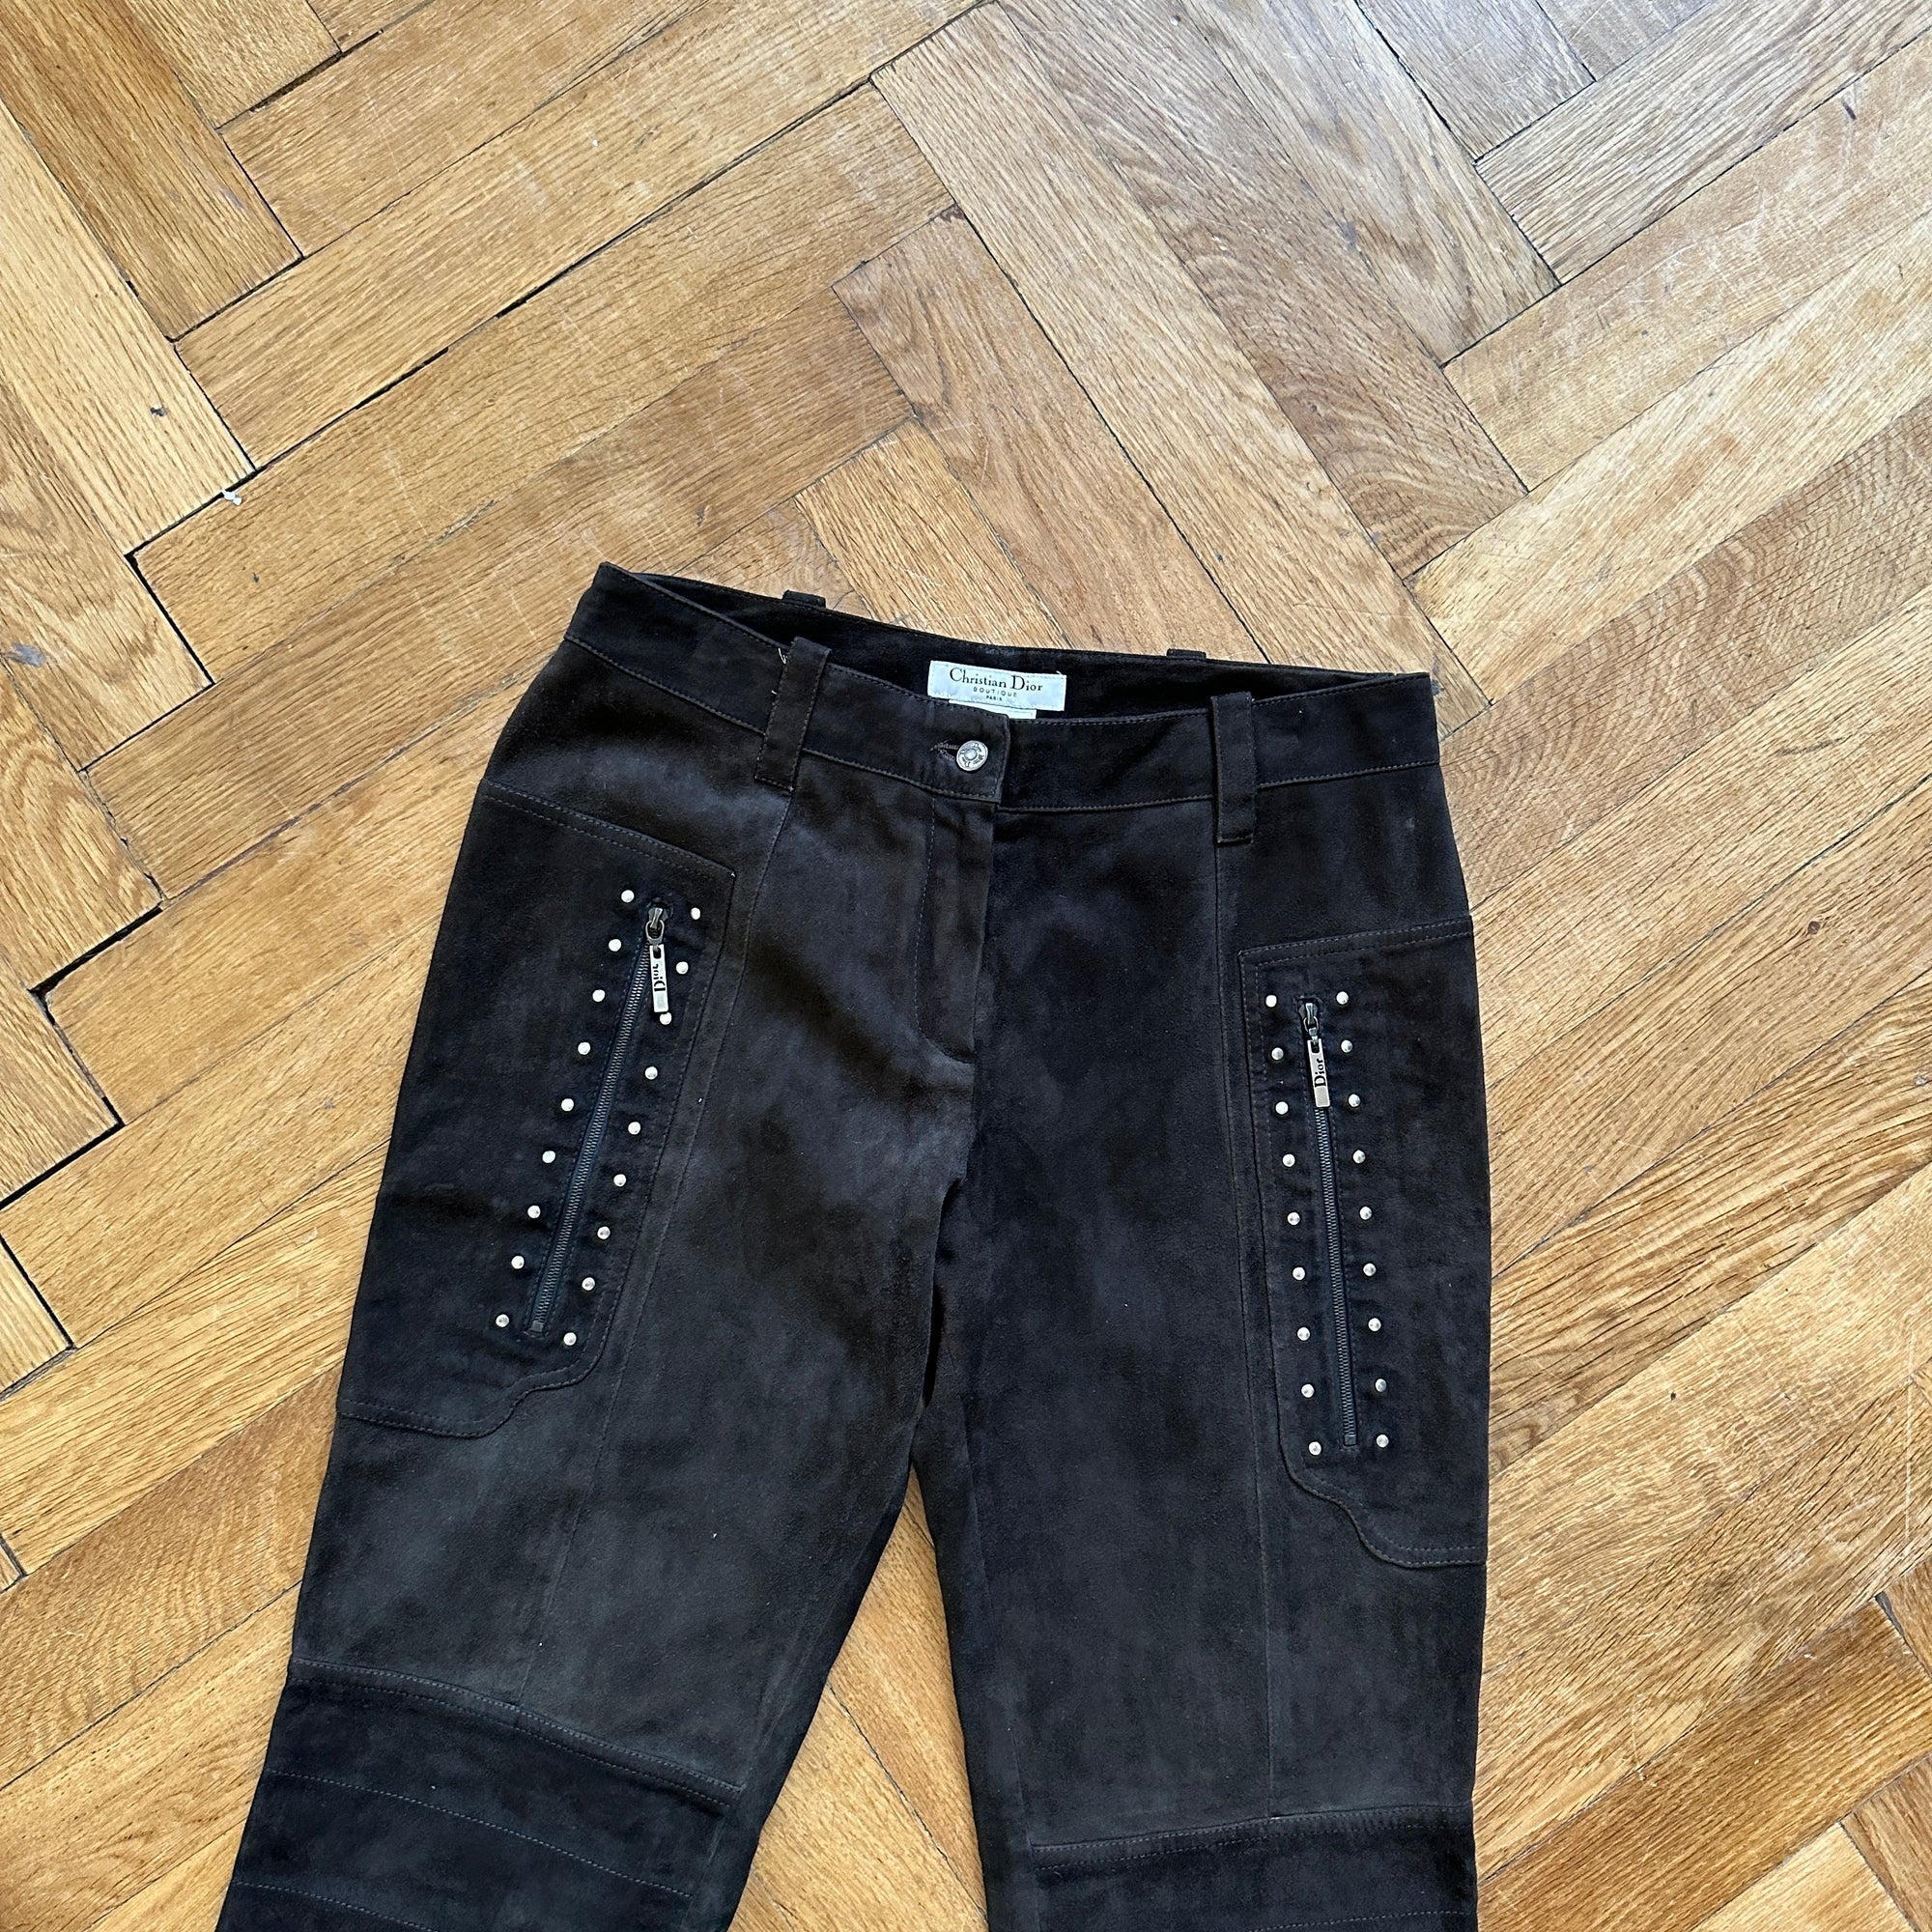 Christian Dior by John Galliano AW04 Studded Suede Biker Pants